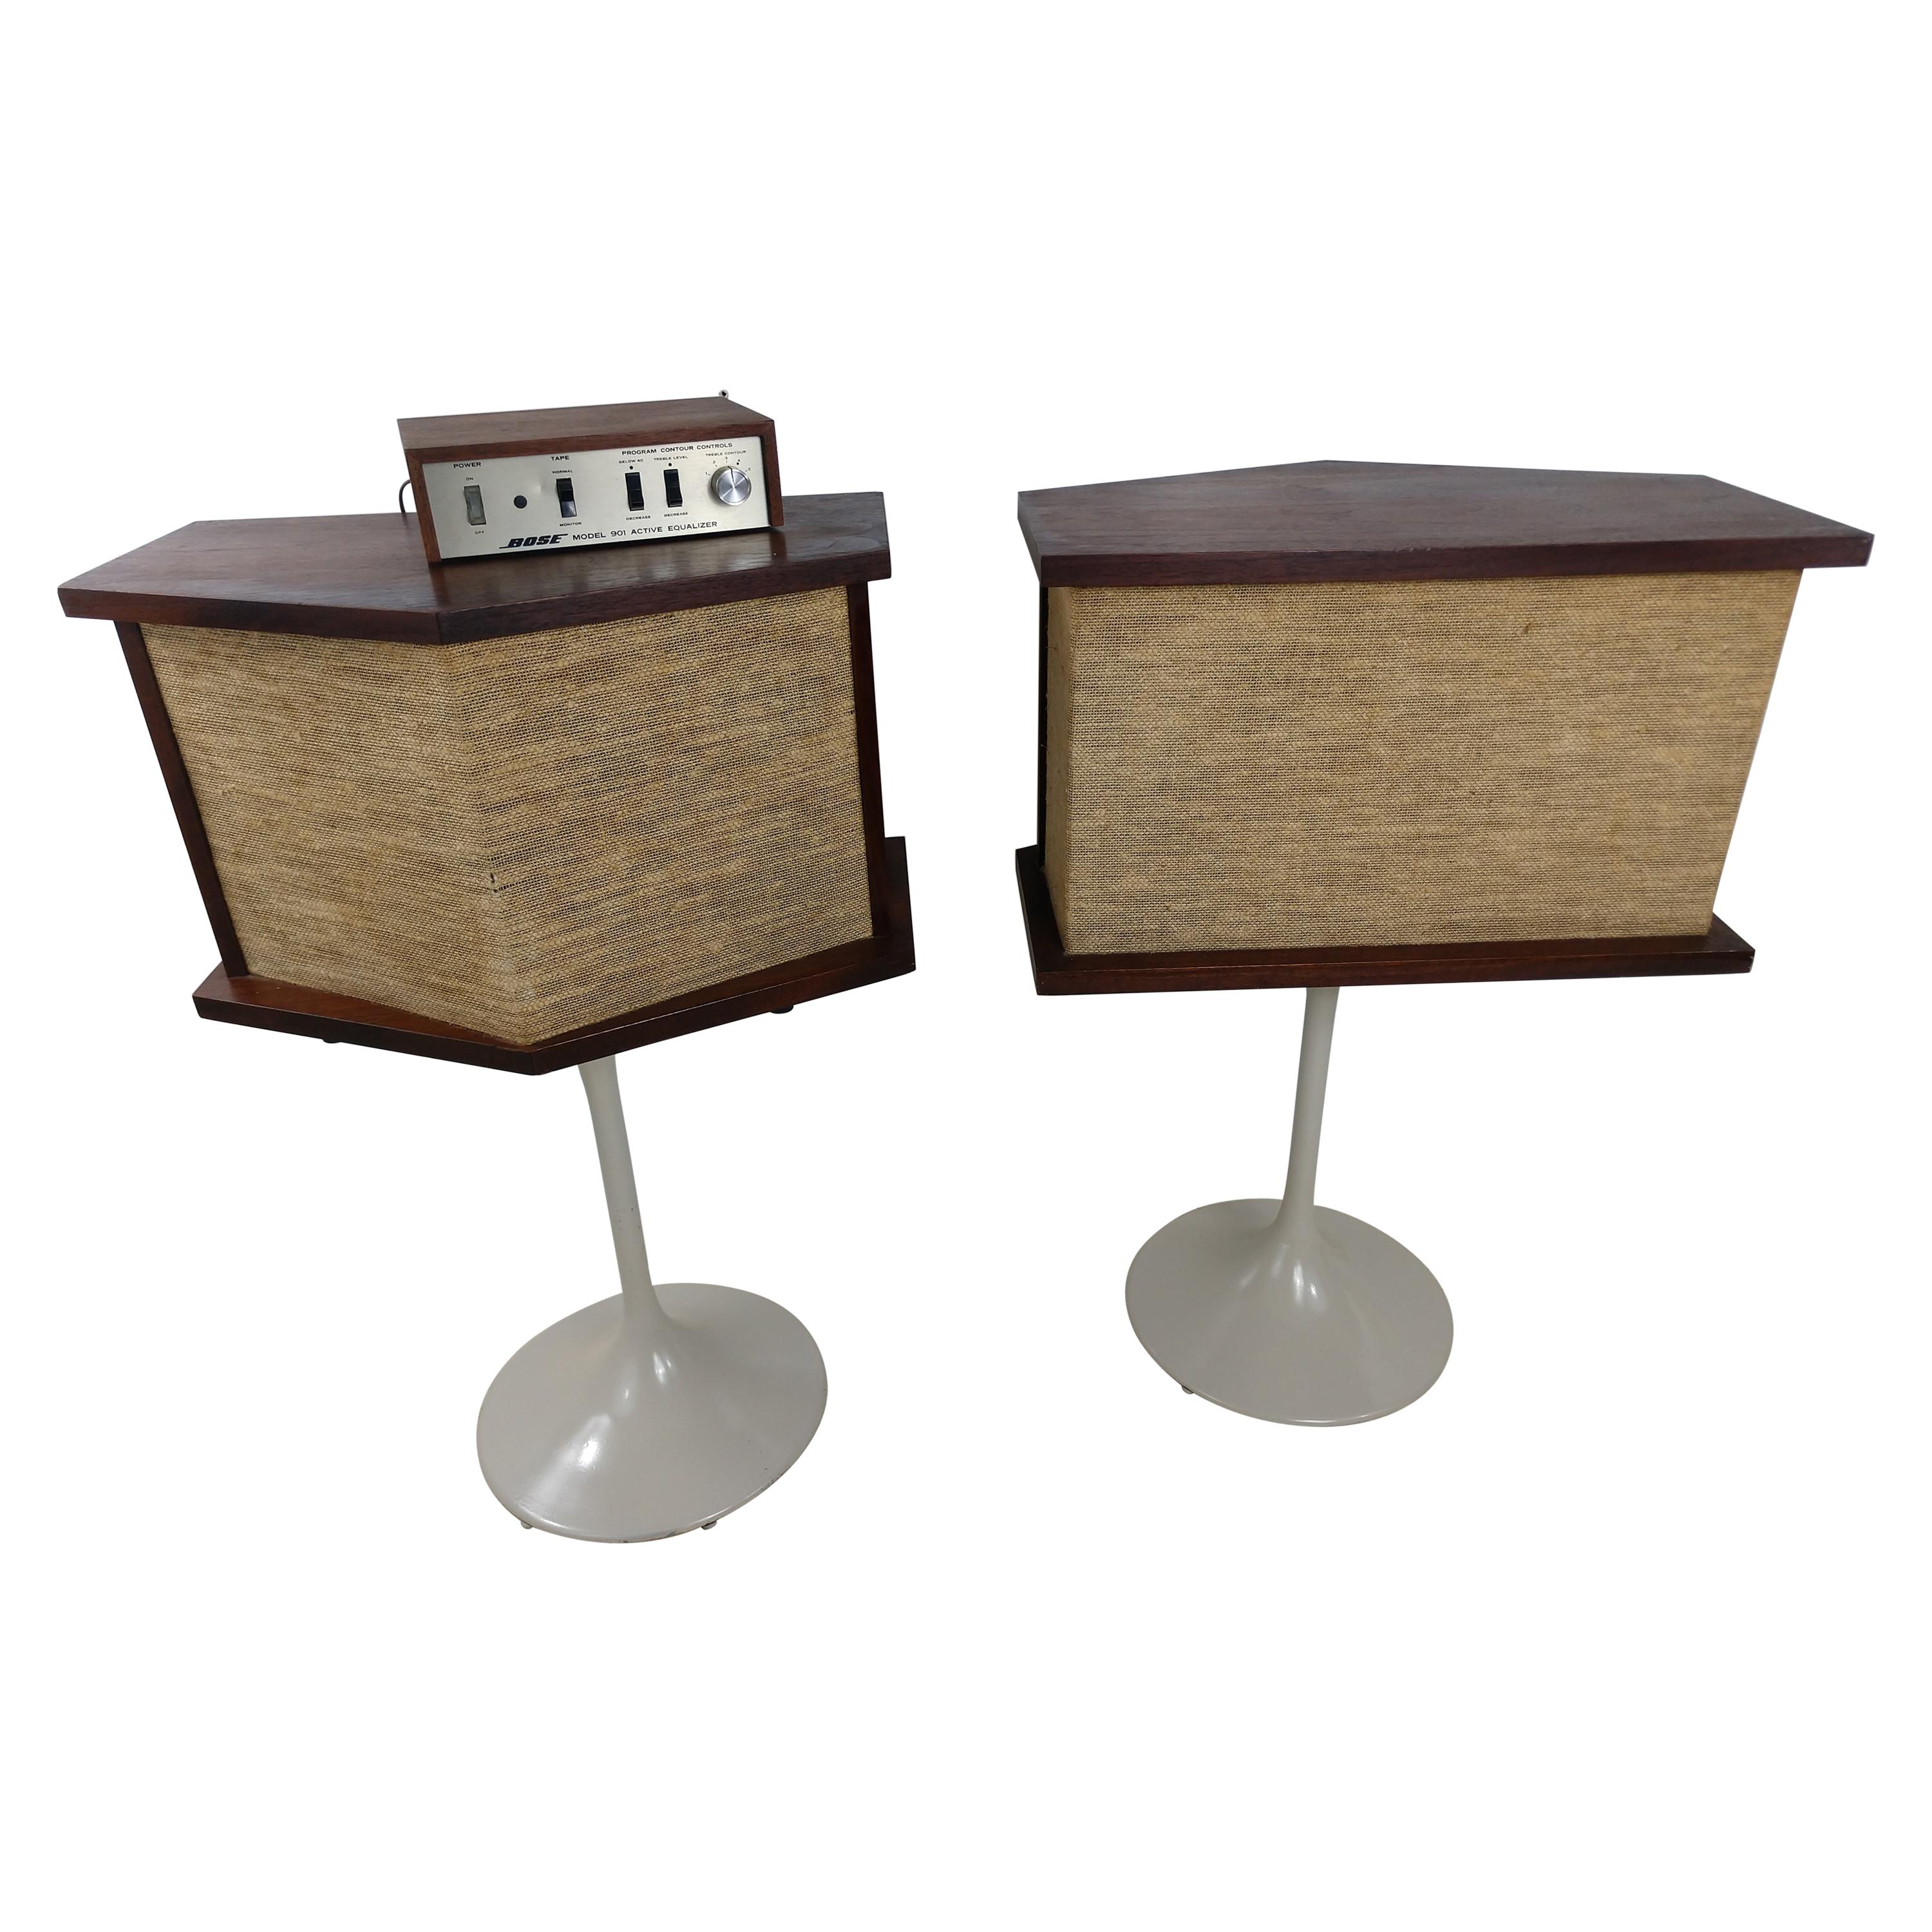 Pair of 901 Bose Speakers on Saarinen Tulip Bases and Equalizer, 1968